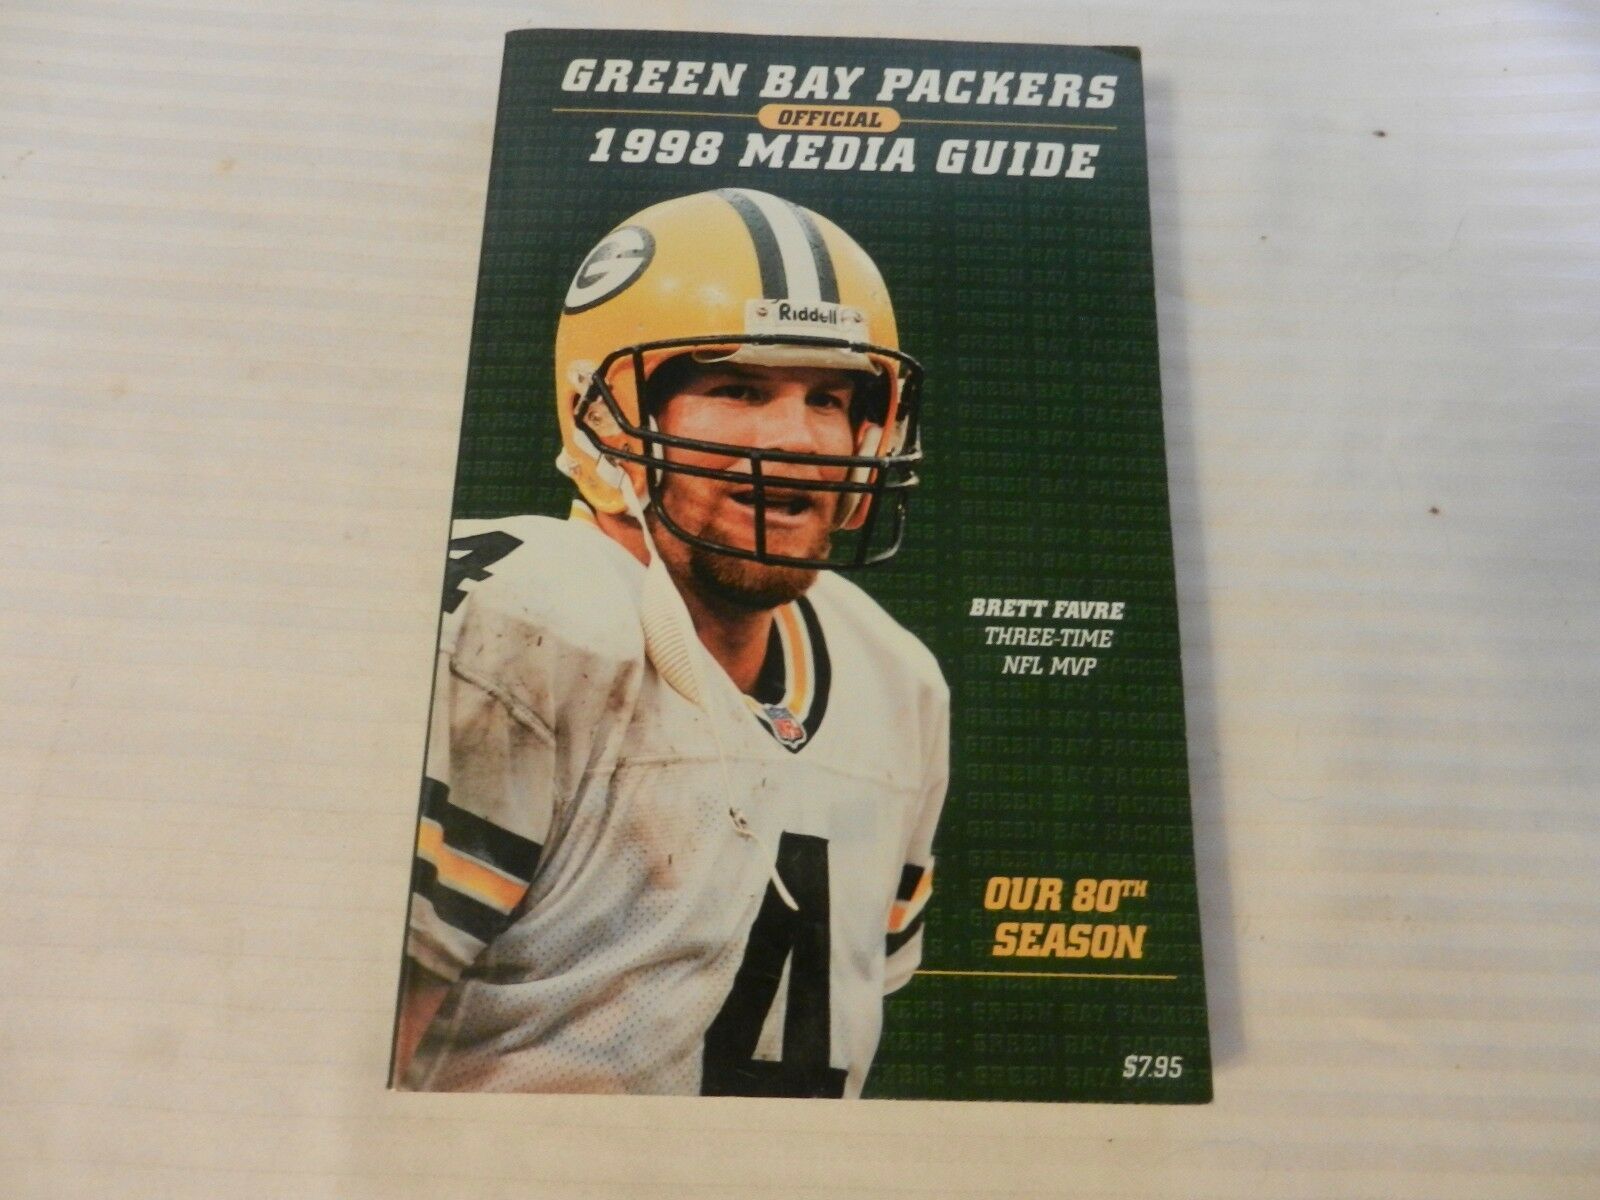 Primary image for 1998 Green Bay Packers Official Media Guide Book Brett Favre on cover